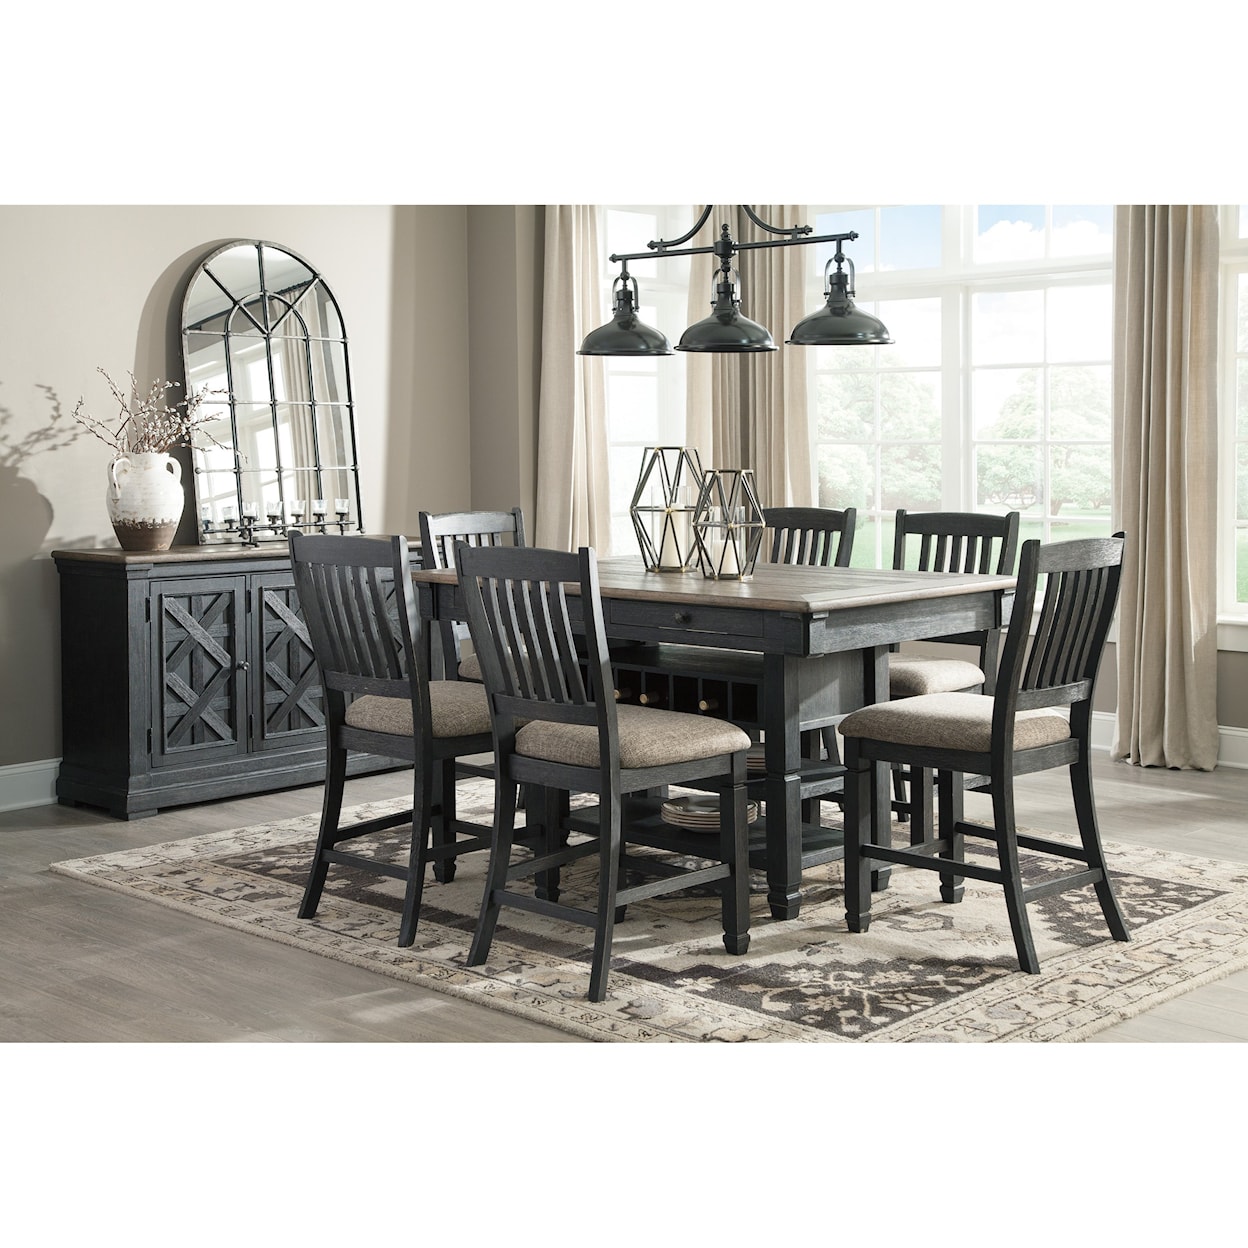 Signature Design by Ashley Furniture Tyler Creek Formal Dining Room Group